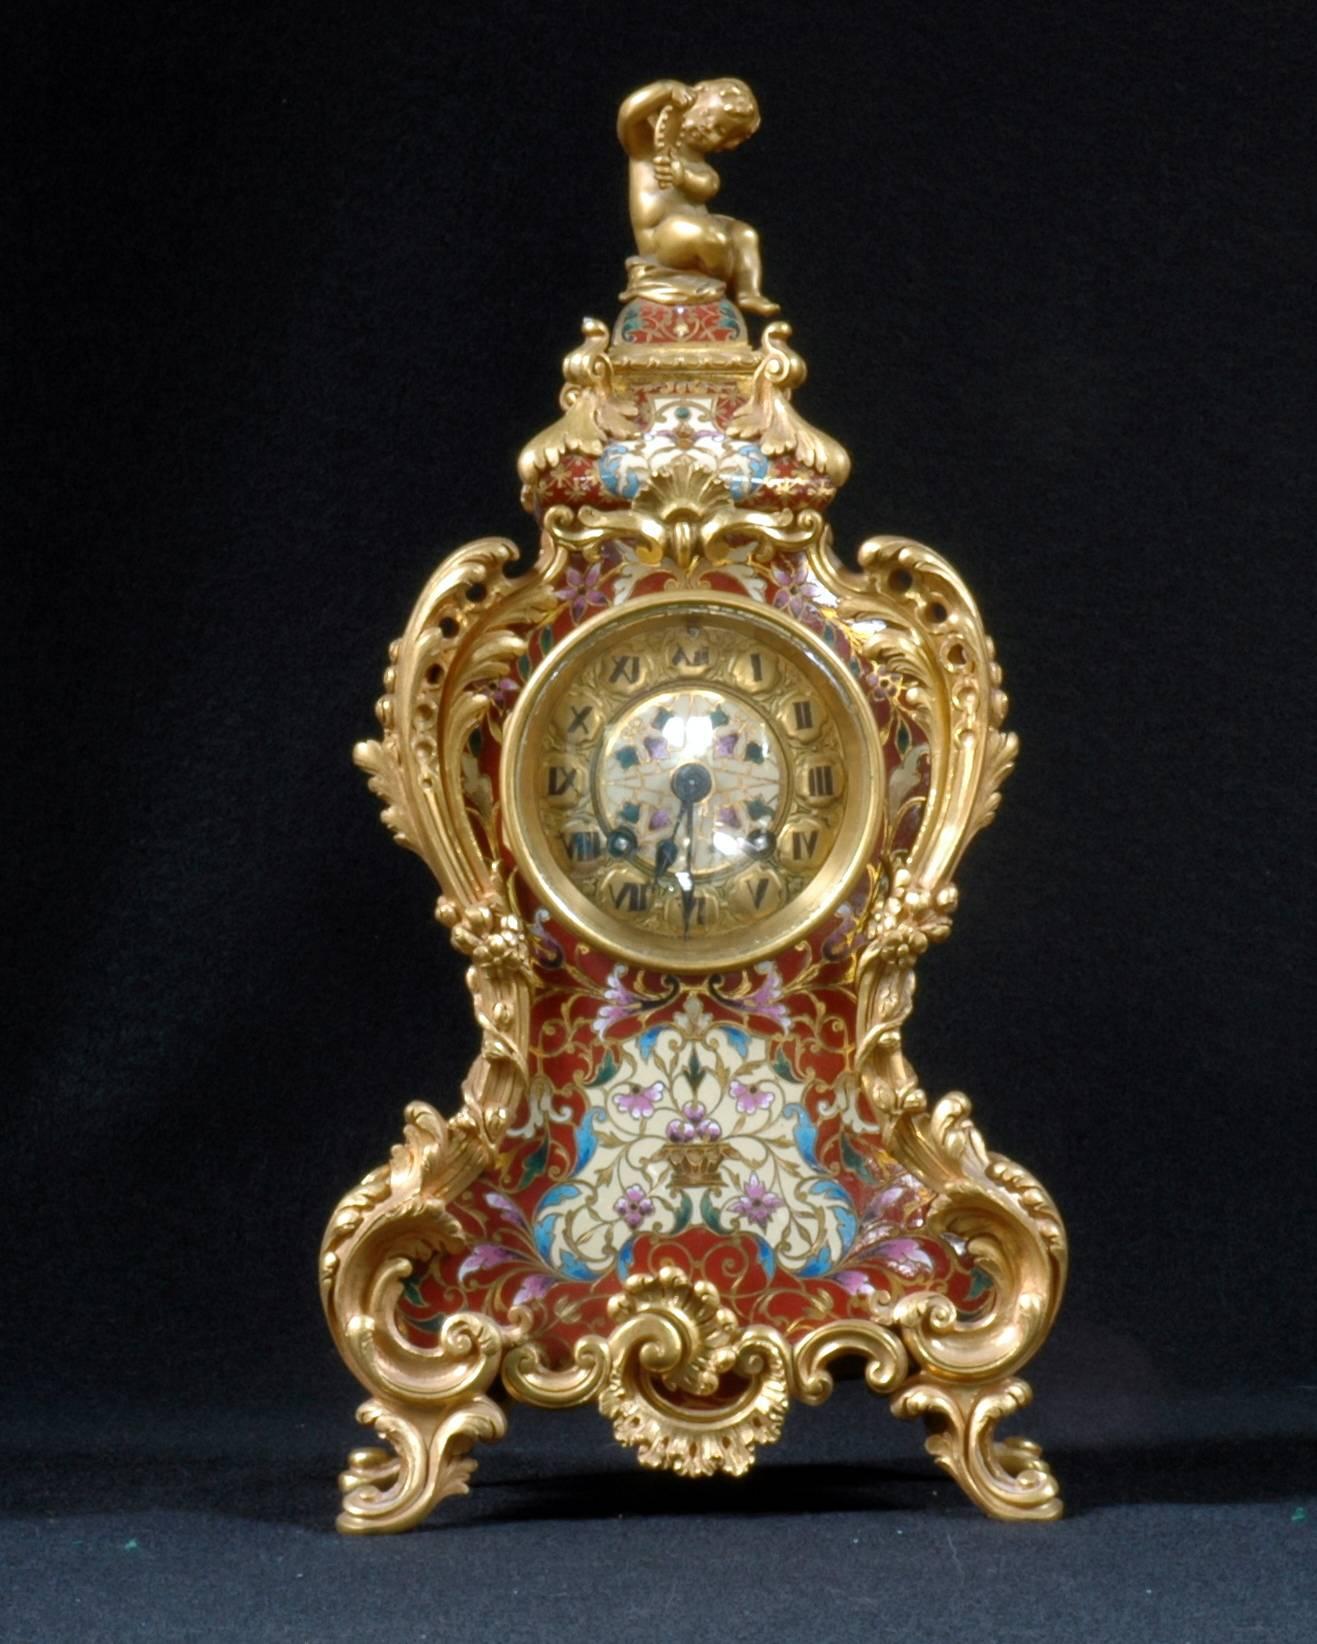 Tiffany enamel clock has a bronze ormolu framework enclosing panels of French Champleve.

A gilt putti that sits on top of dome on top.

Stamped on the backplate of the movement: Tiffany
Medaille d'Argent Vincenti & Cie 1855

Stamped into